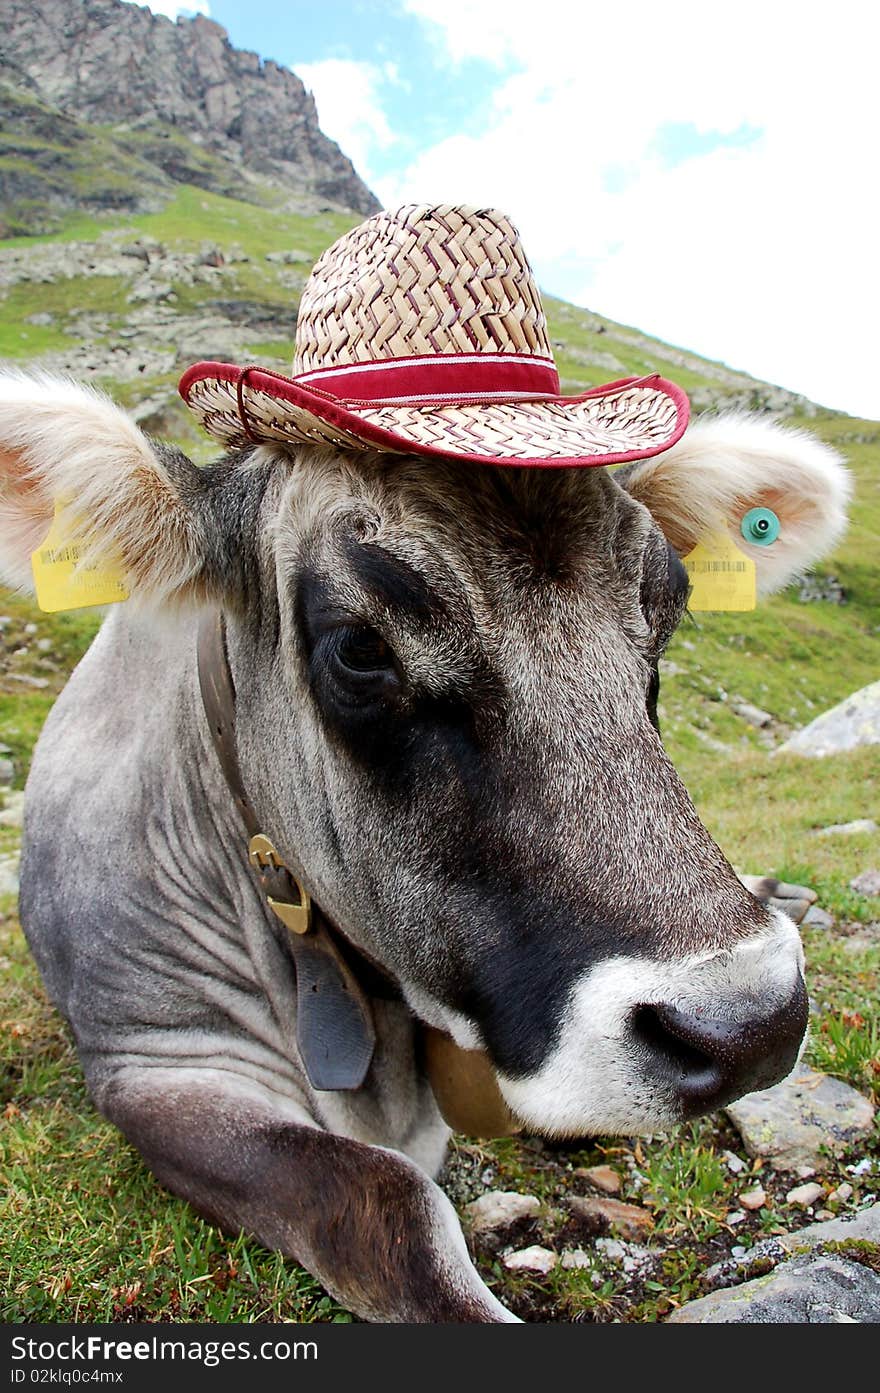 Crazy Cow with hat in Austria.